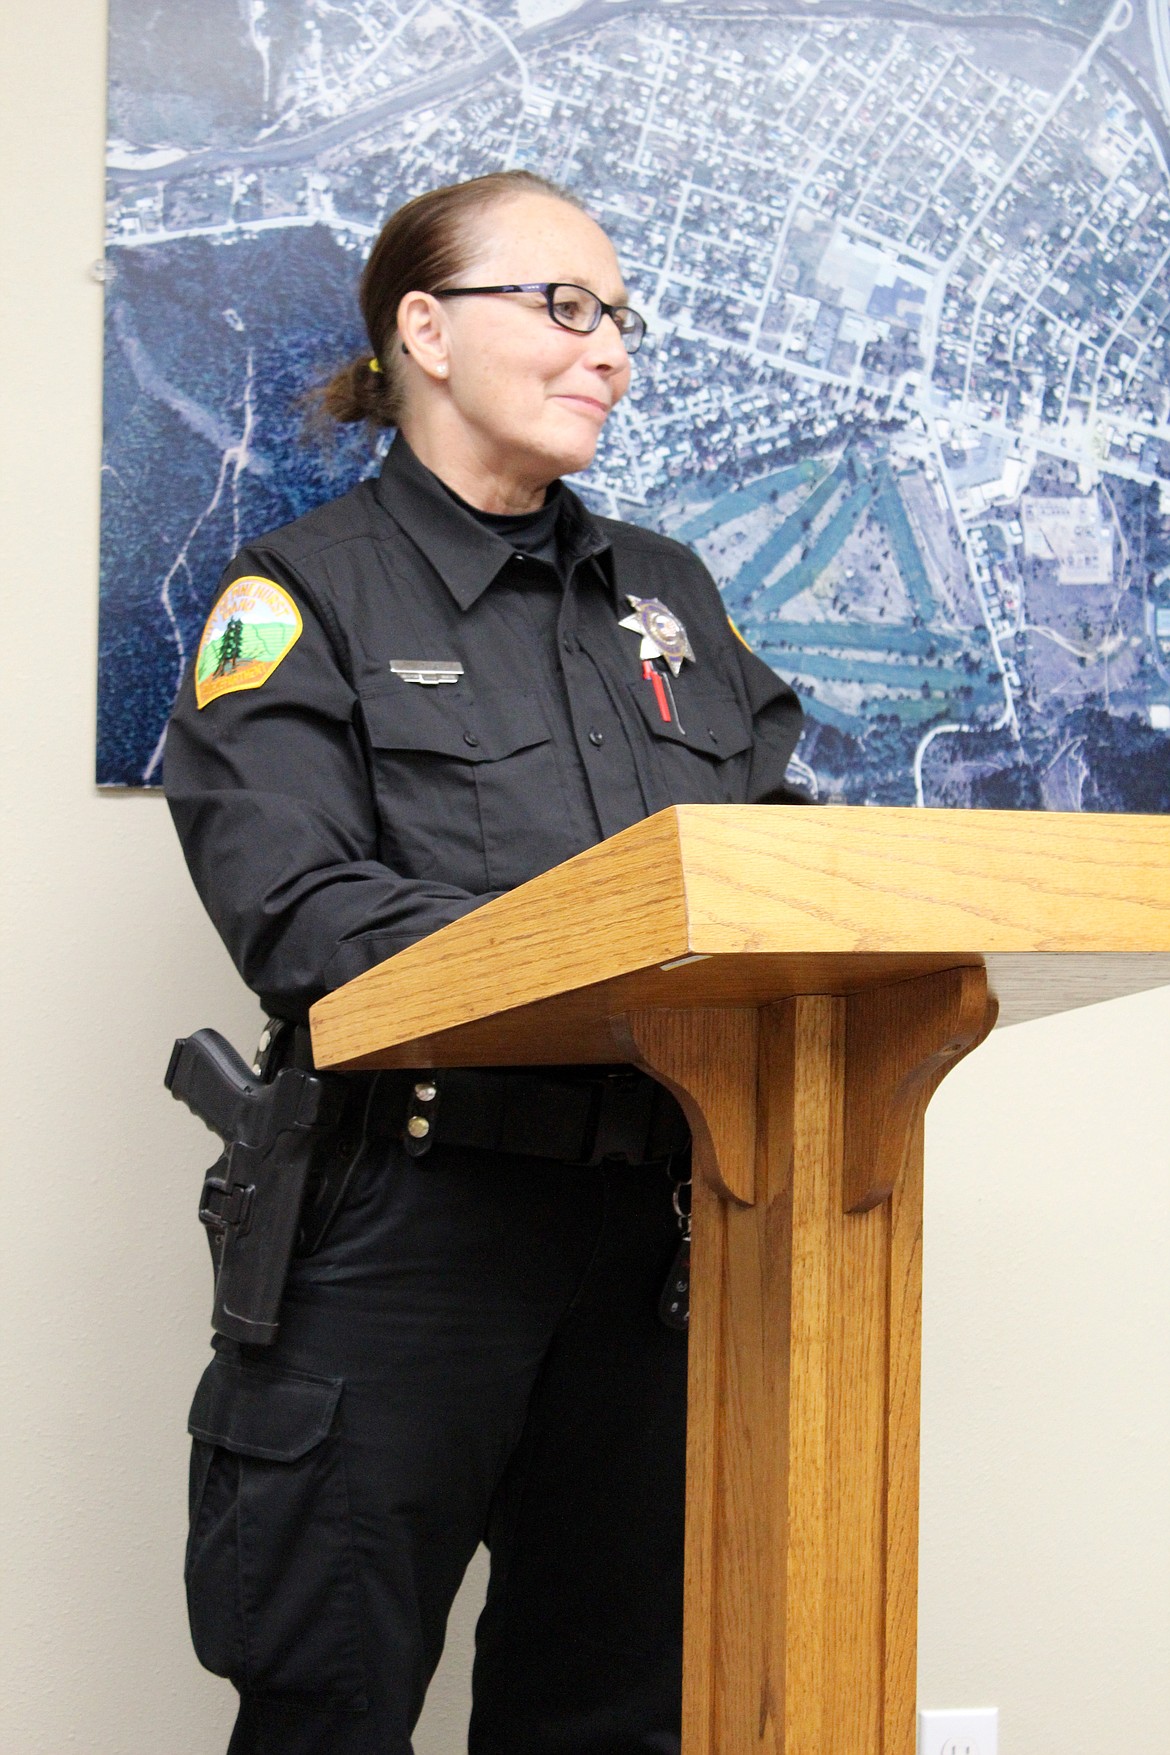 Chief Holdahl gives her first police report to the City Council.